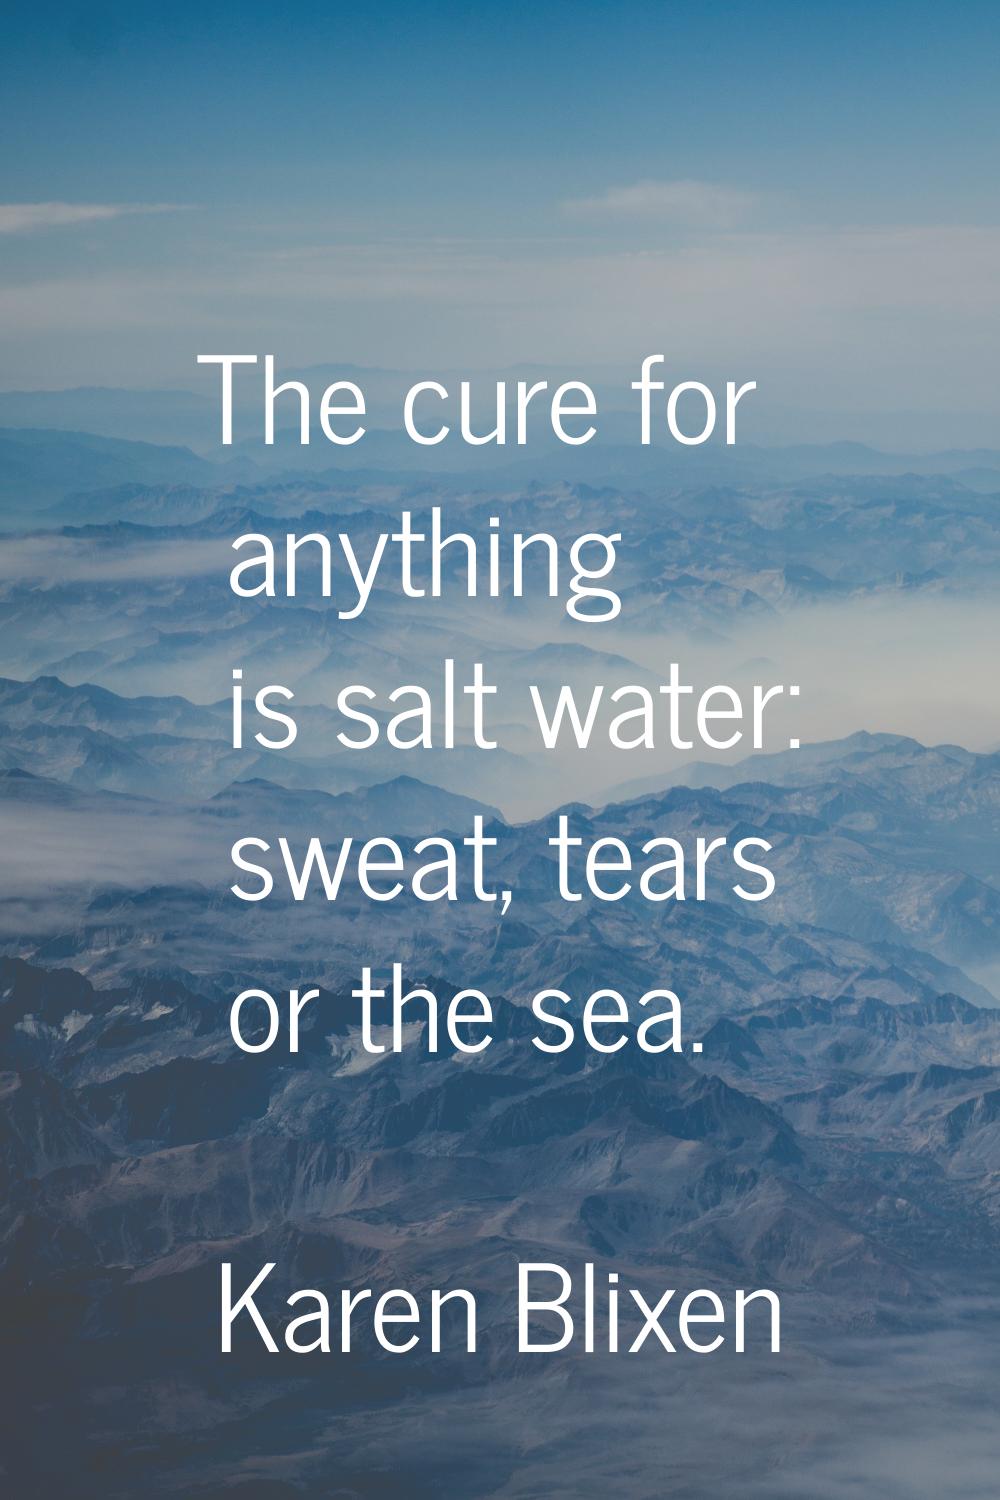 The cure for anything is salt water: sweat, tears or the sea.